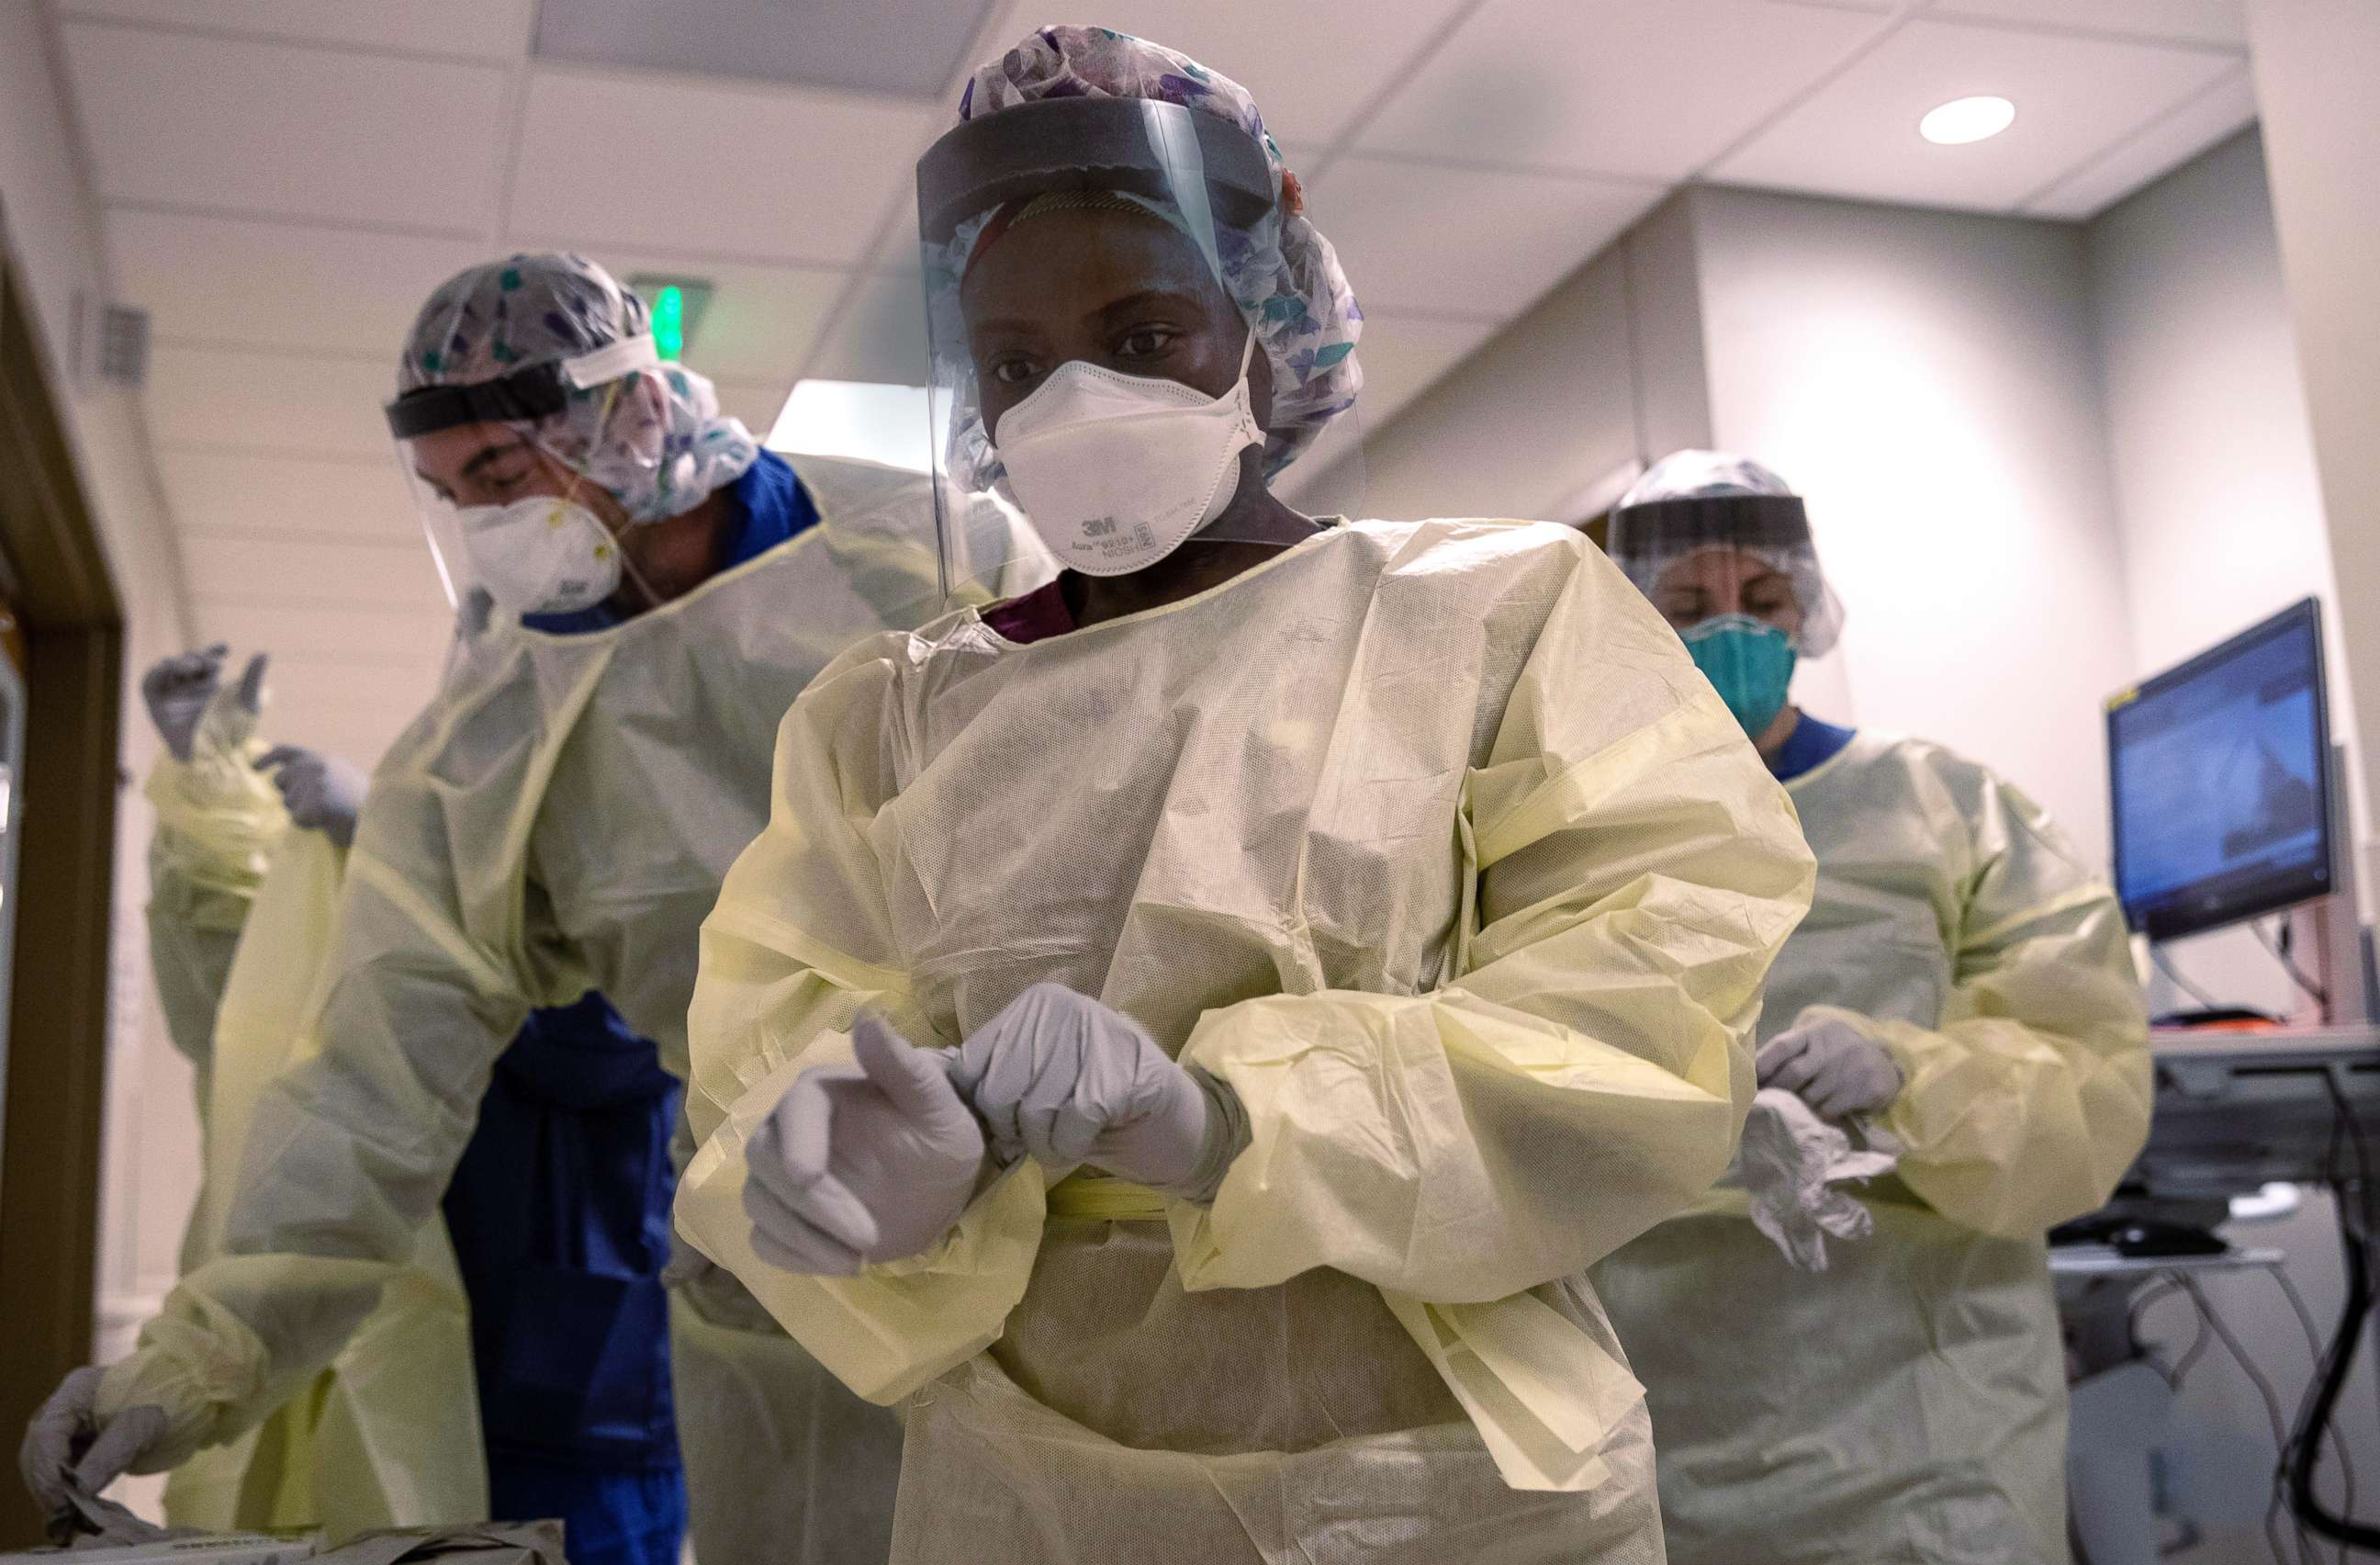 PHOTO: Medical workers dons personal protective equipment before entering the room of a patient with COVID-19 in a Stamford Hospital intensive care unit, on April 24, 2020, in Stamford, Conn.